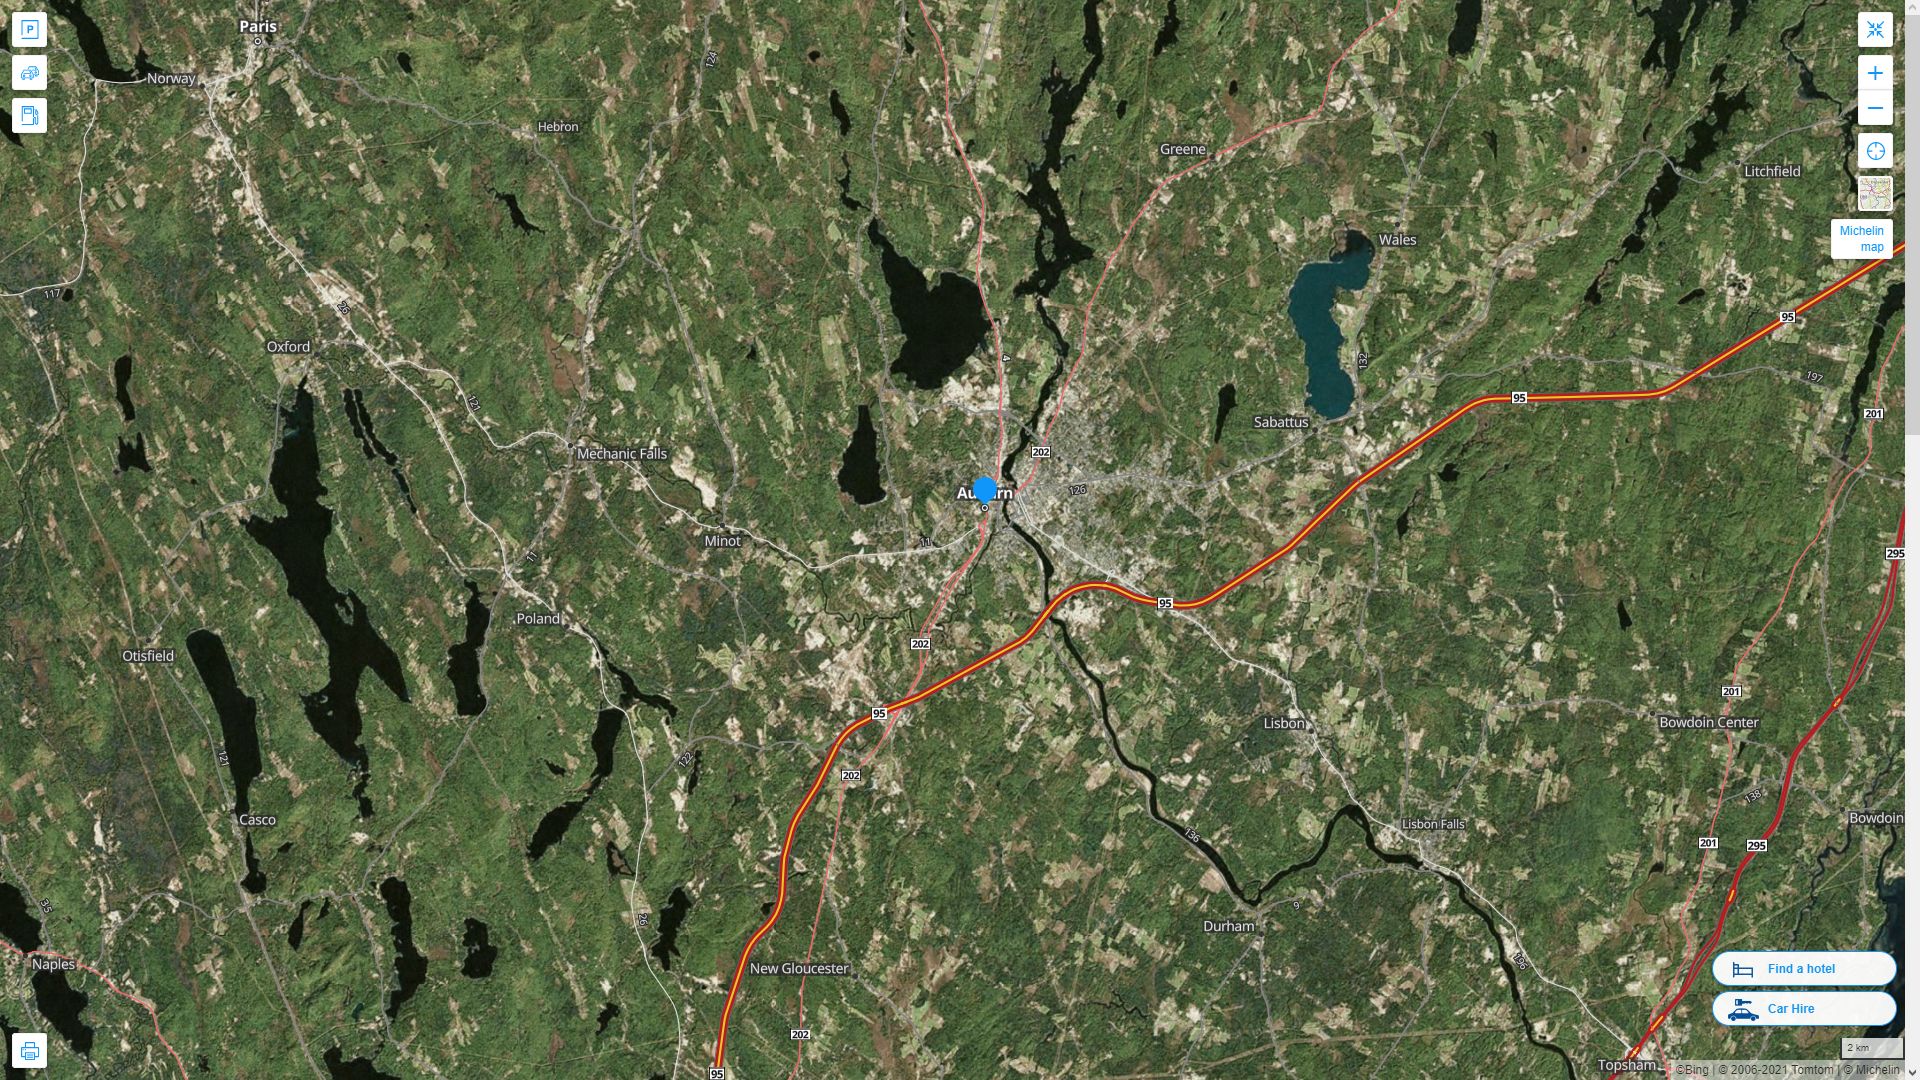 Auburn Maine Highway and Road Map with Satellite View